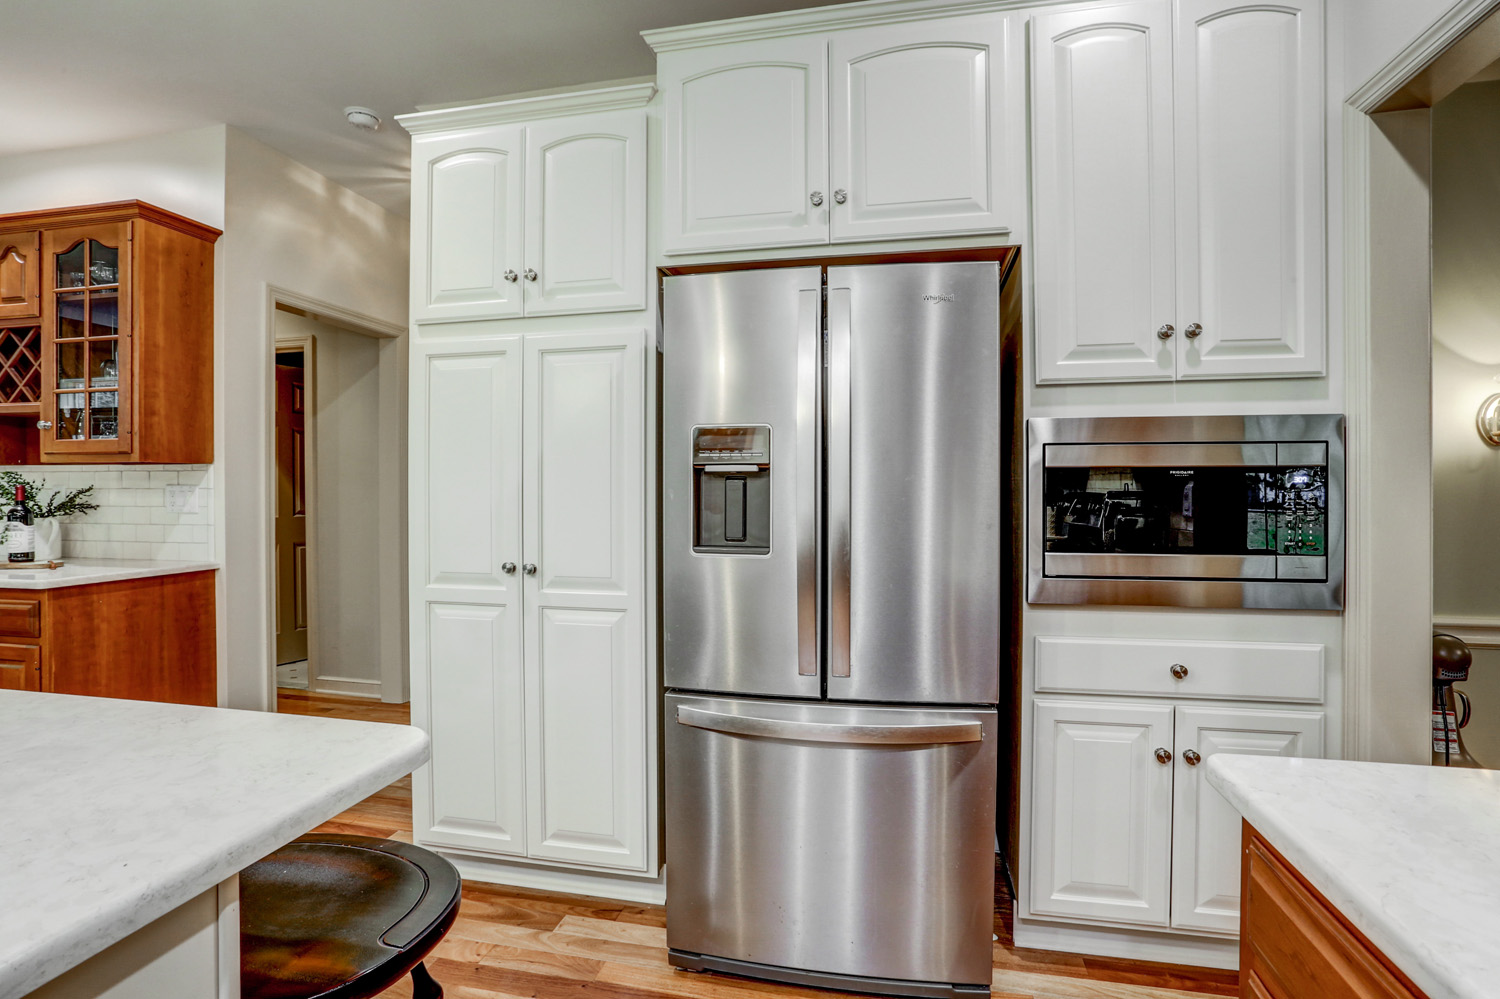 Centerville Kitchen Refresh with new white cabinets around refrigerator and microwave